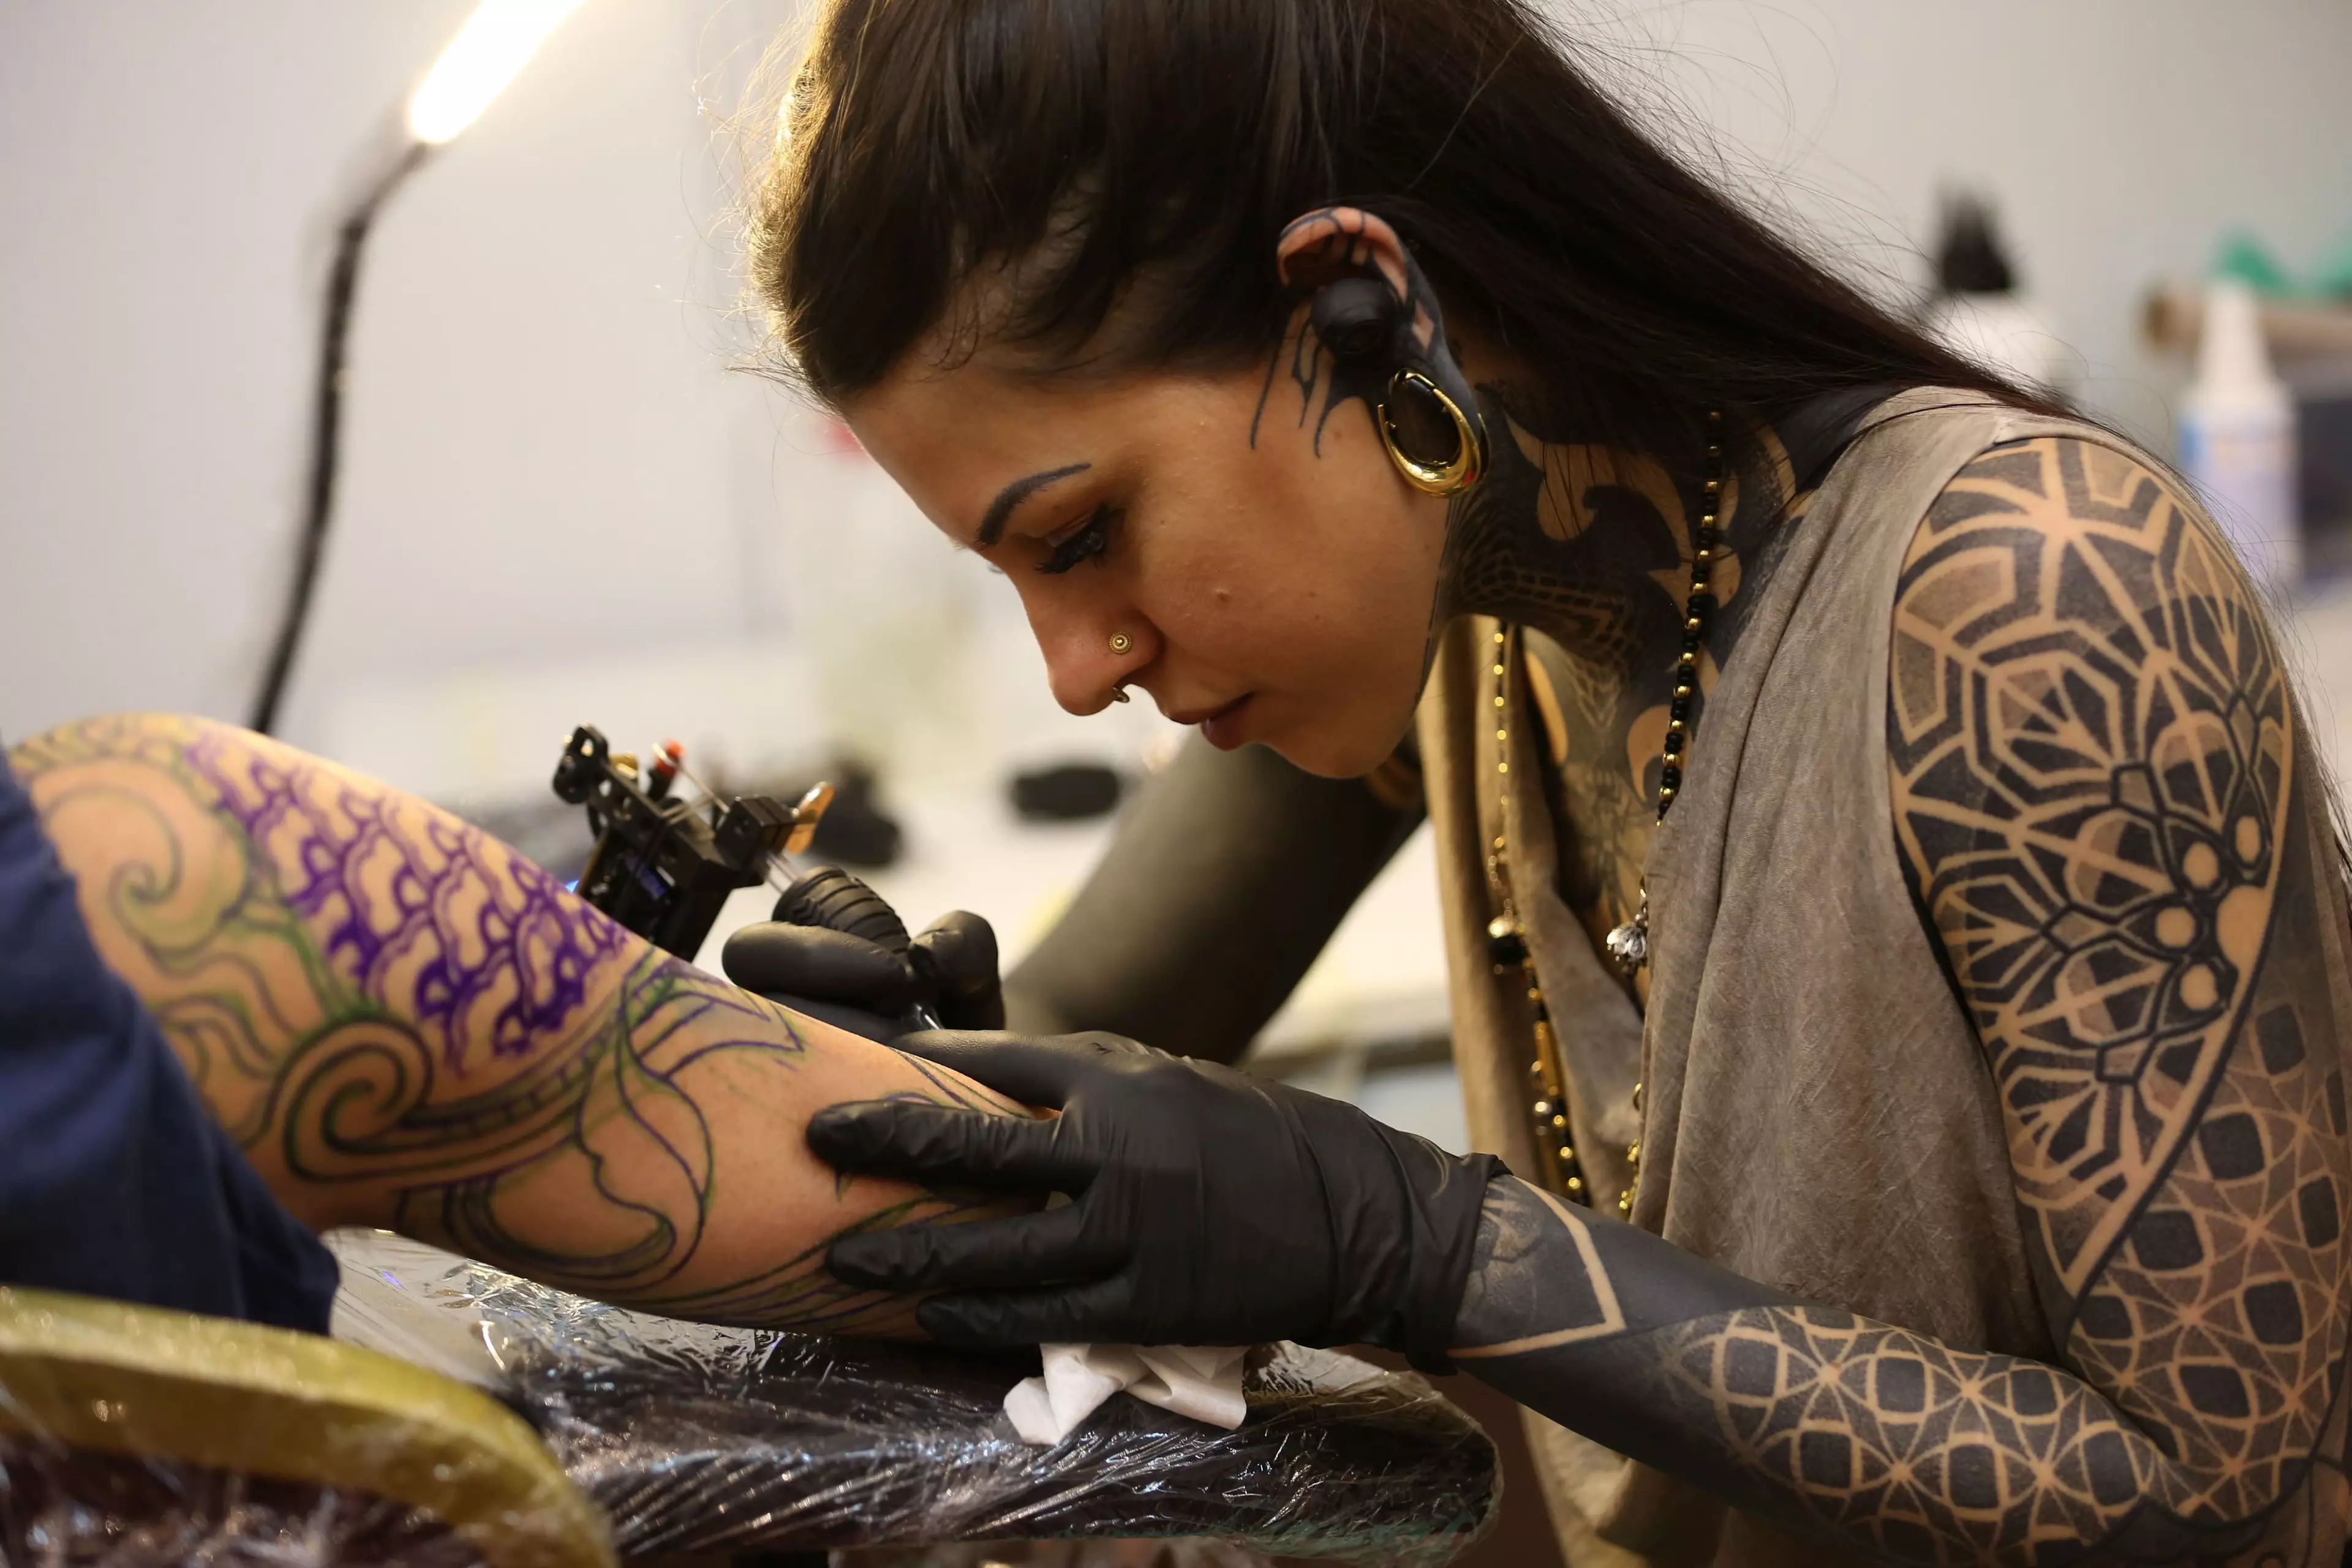 Scientists have found that a pigment used in colourful tattoos can have potentially toxic effects.